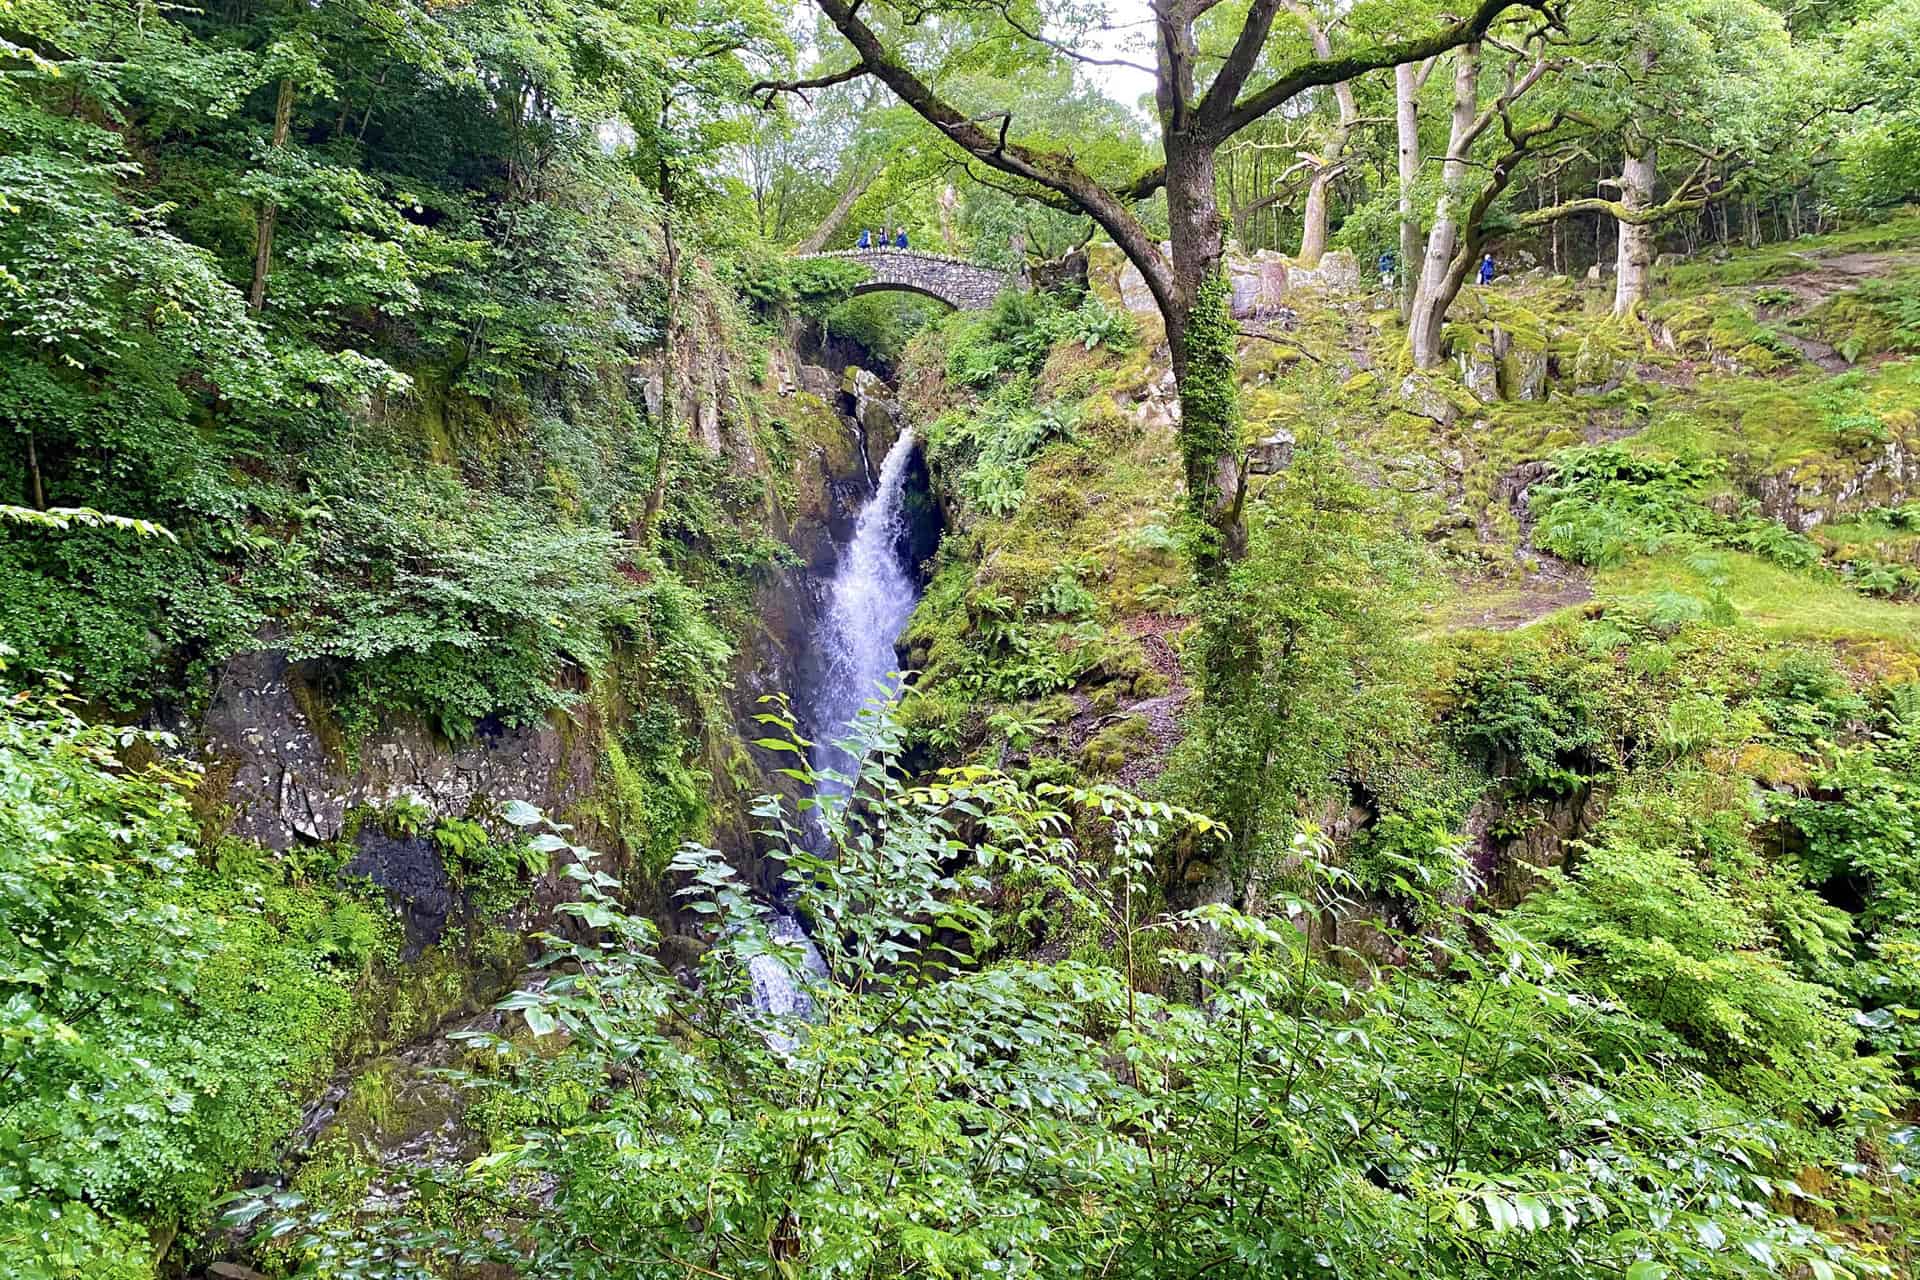 Aira Beck drops approximately 20 metres down a steep-sided ravine into a rocky plunge pool before continuing its journey to Ullswater.